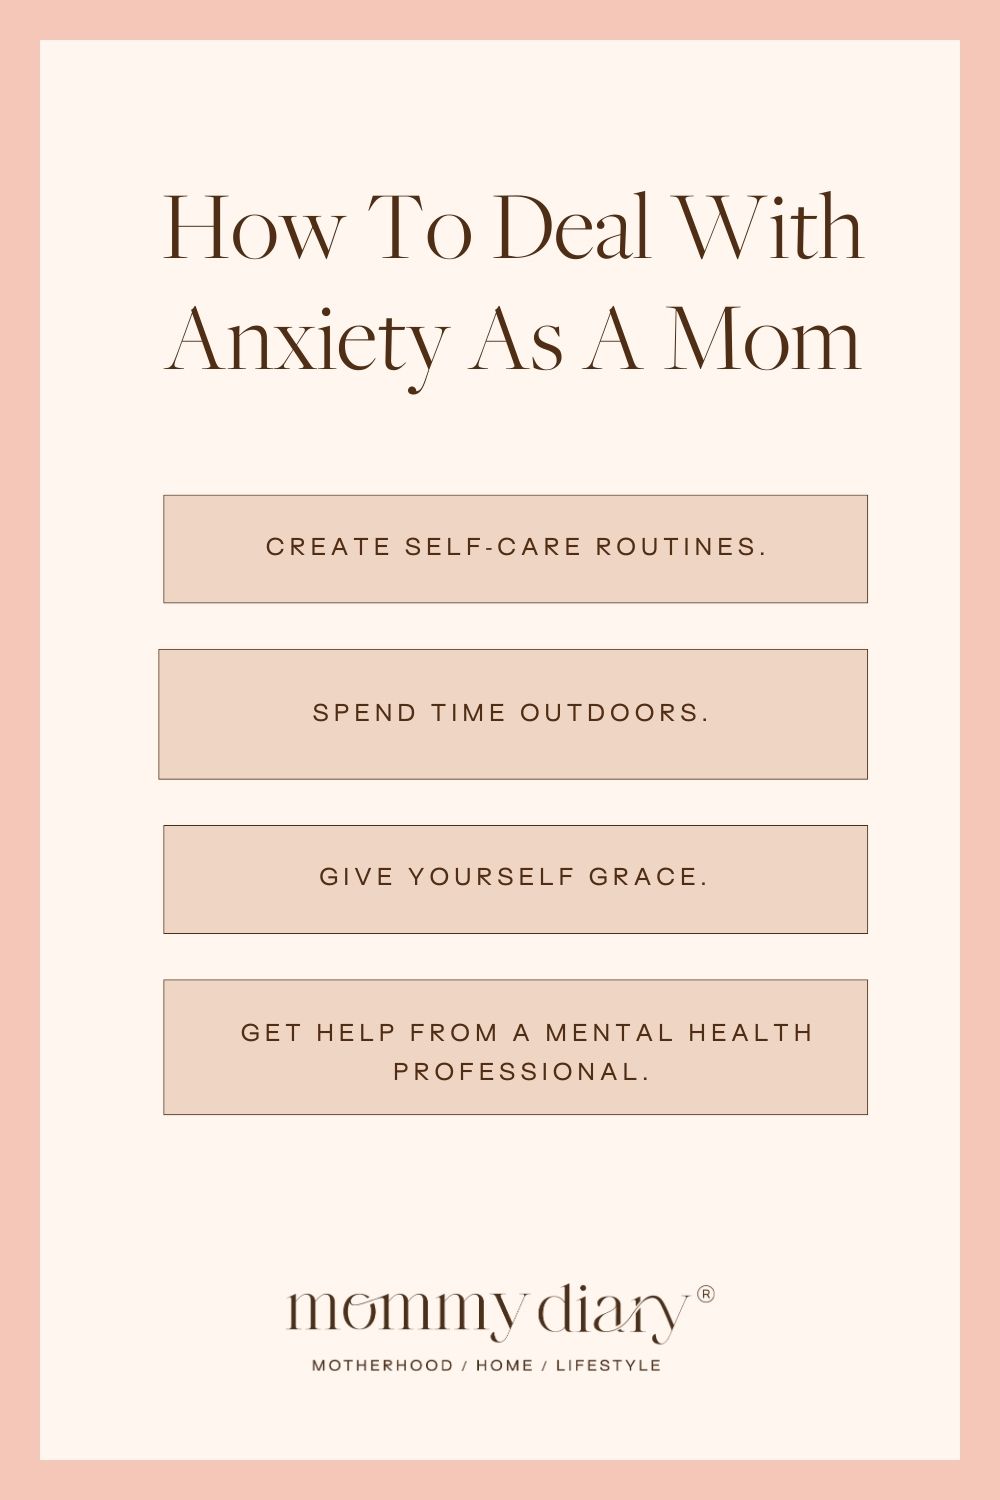 How To Deal With Anxiety As A Mom part 2